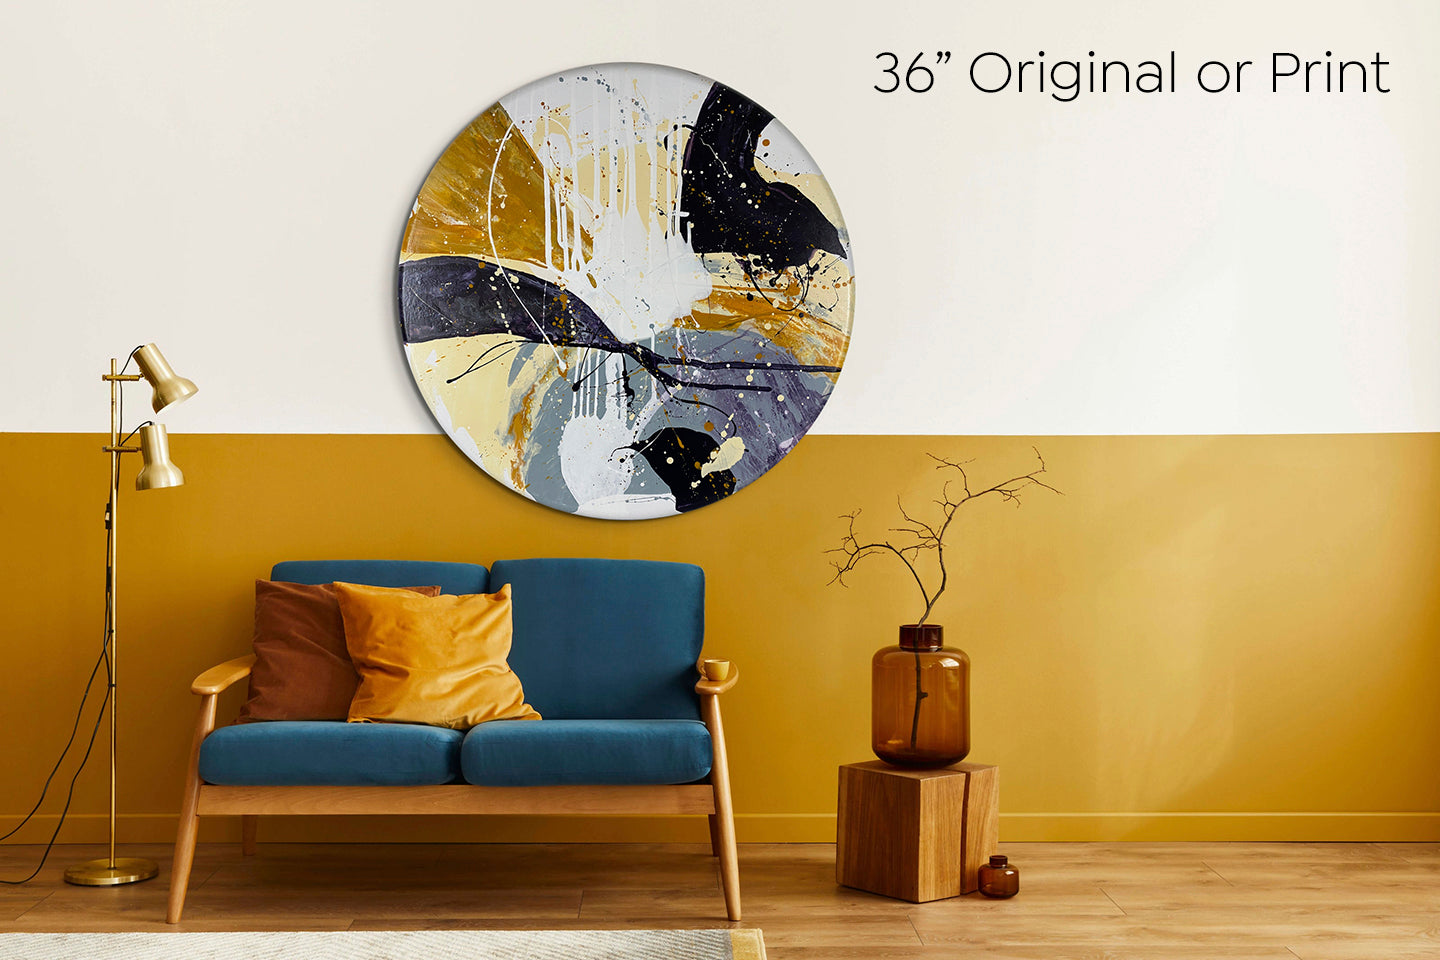 Abstract, acrylic painting on a round canvas with curved-edges shown on a wall with that is white above and ochre gold below with a teal couch